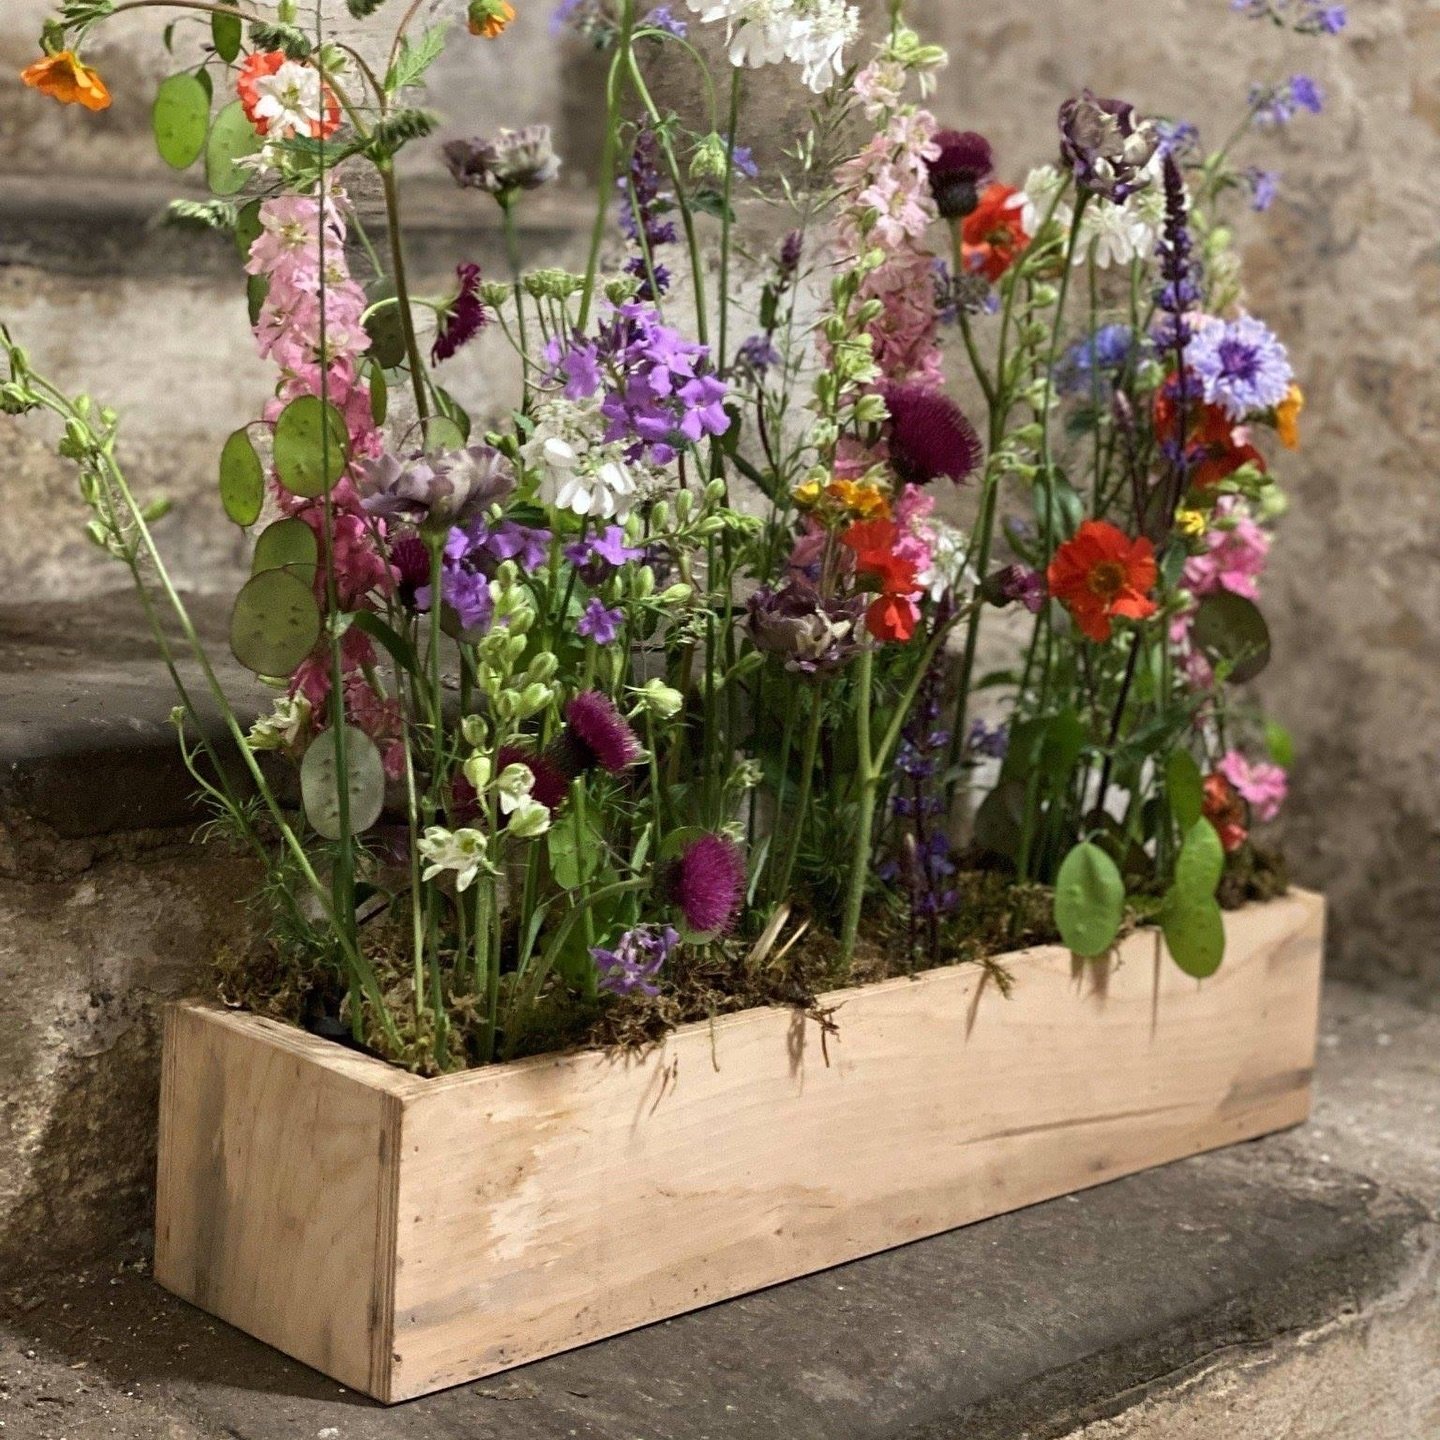 BRITISH FLOWERS WEEK WORKSHOPS

HELLO SPRING! - One day course

Come spend a day with us, immerse yourself in the joys of summer, and learn to create your own hand-tied bouquet and meadow box arrangement.
 
You will be invited to the abundant flower 